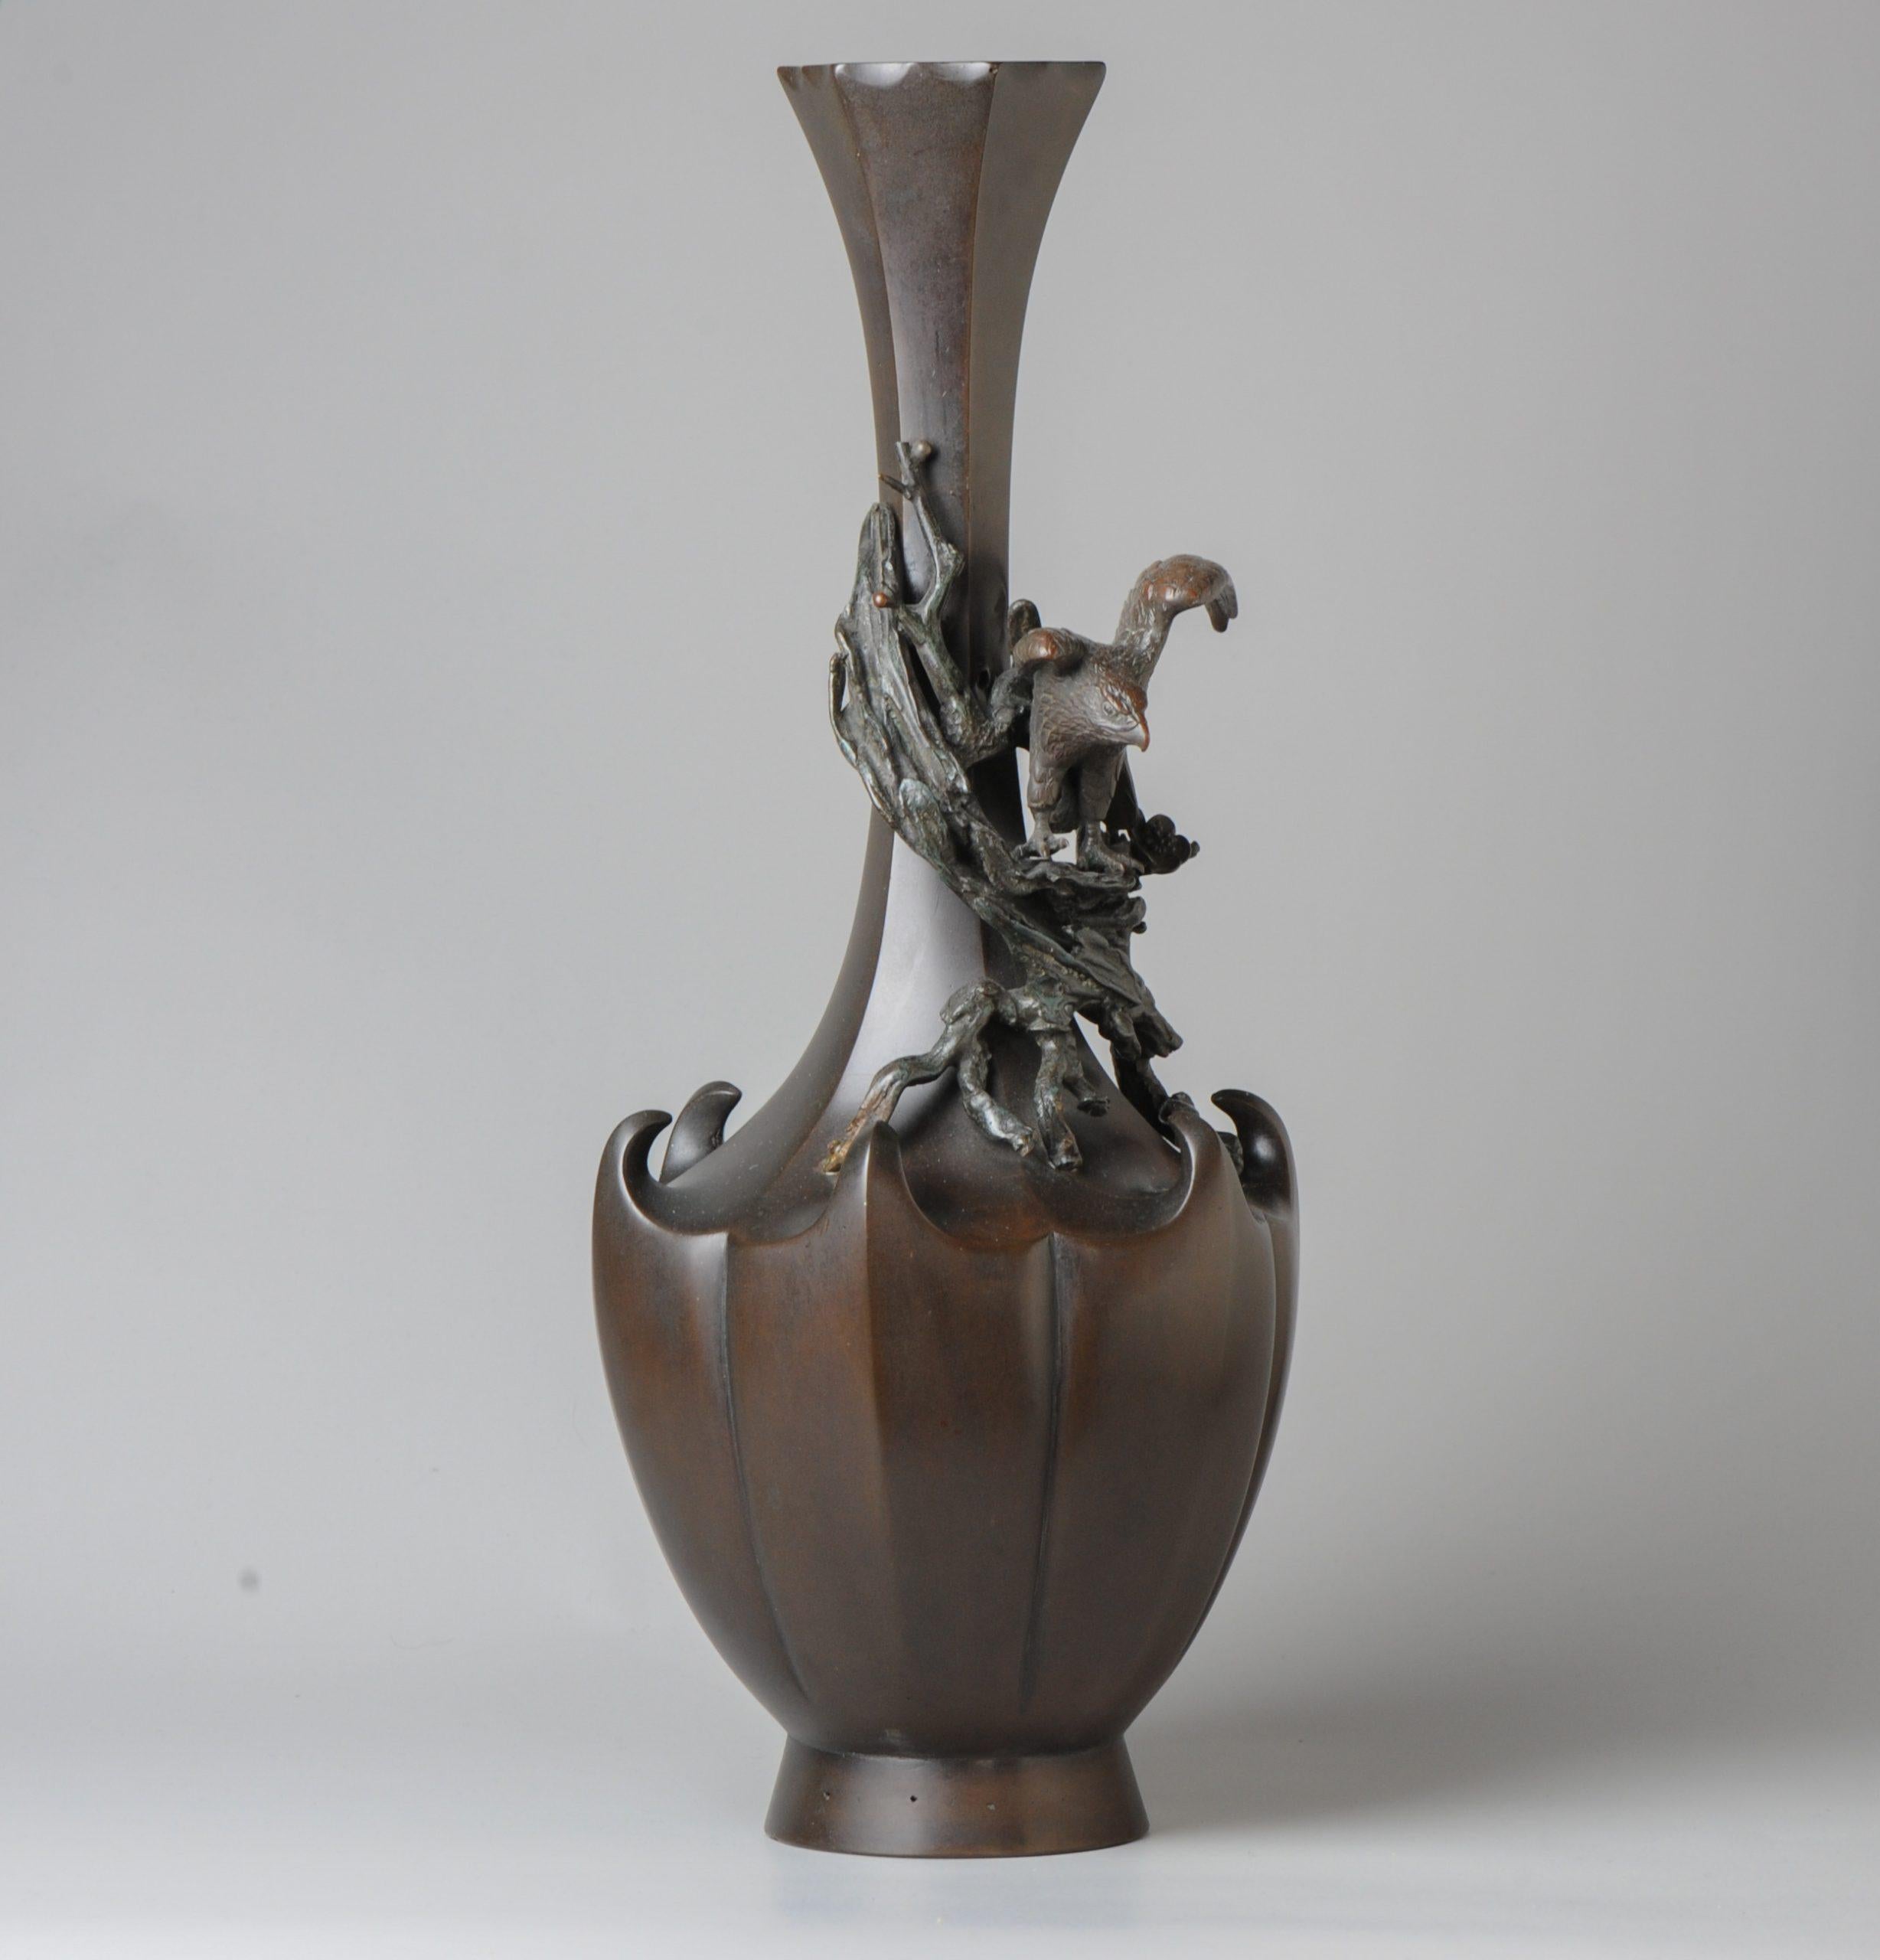 Description
Nicely made artifact of very high quality.

The vase is shaped nicely and the addition of a bird of prey, Eagle, on a branch is amazing.
The mark reads:
?? Seiya.
This is ??? ?? Genryusai Seiya of the Meiji